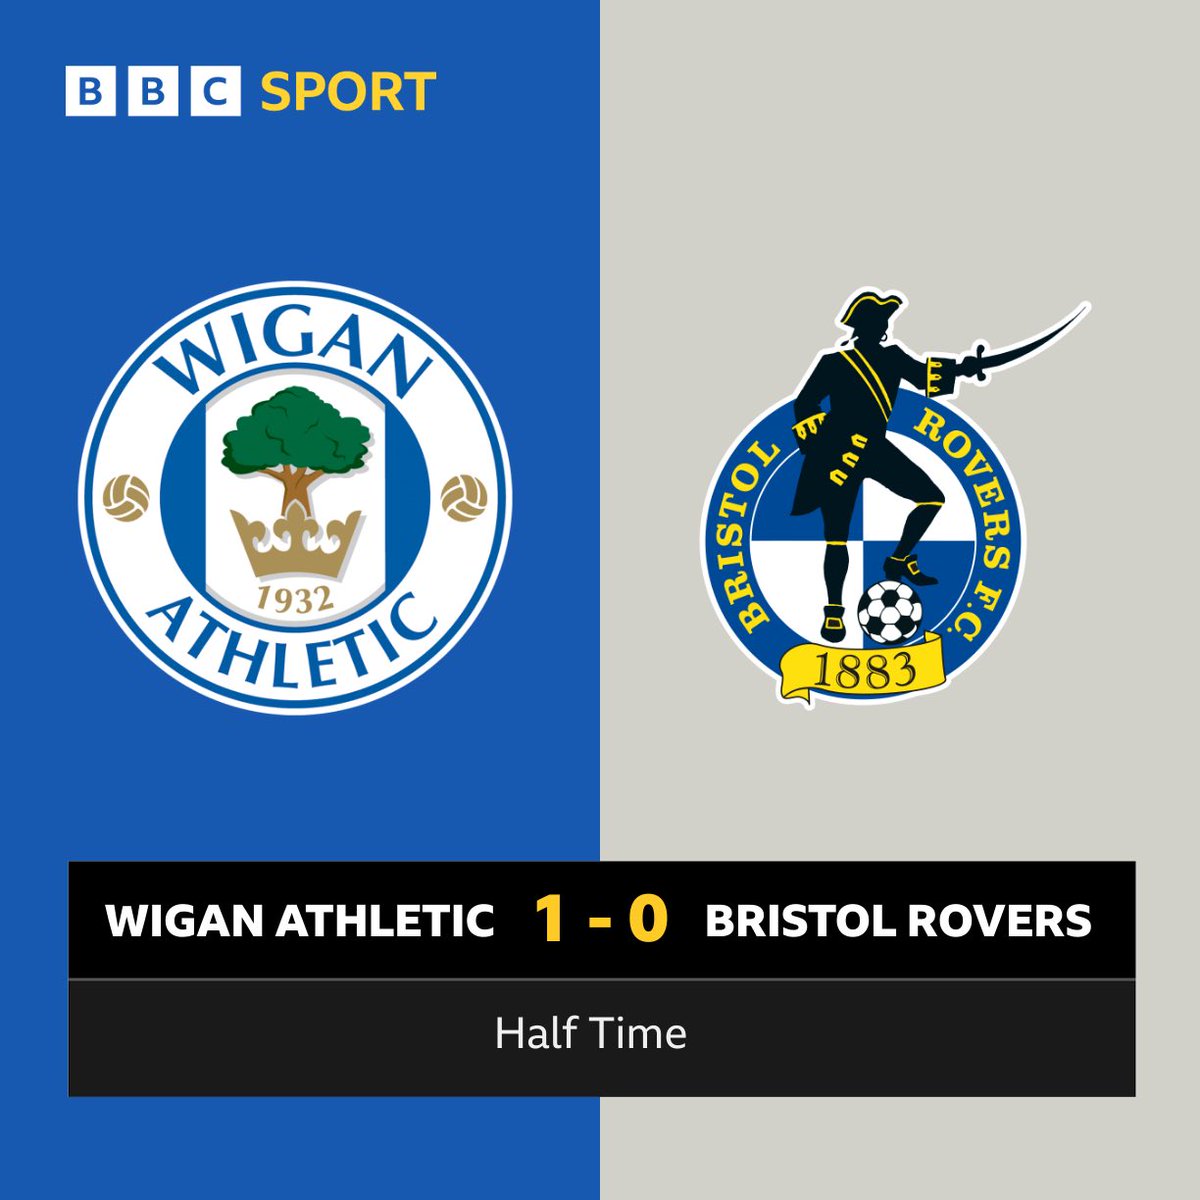 HT Wigan 1-0 Rovers Wigan have a deserved half time lead as Magennis bundles home a quick break. Jed Ward had already produced 3 good early saves. Rovers have produced some neat play, but only a deflected shot just wide to show for it.